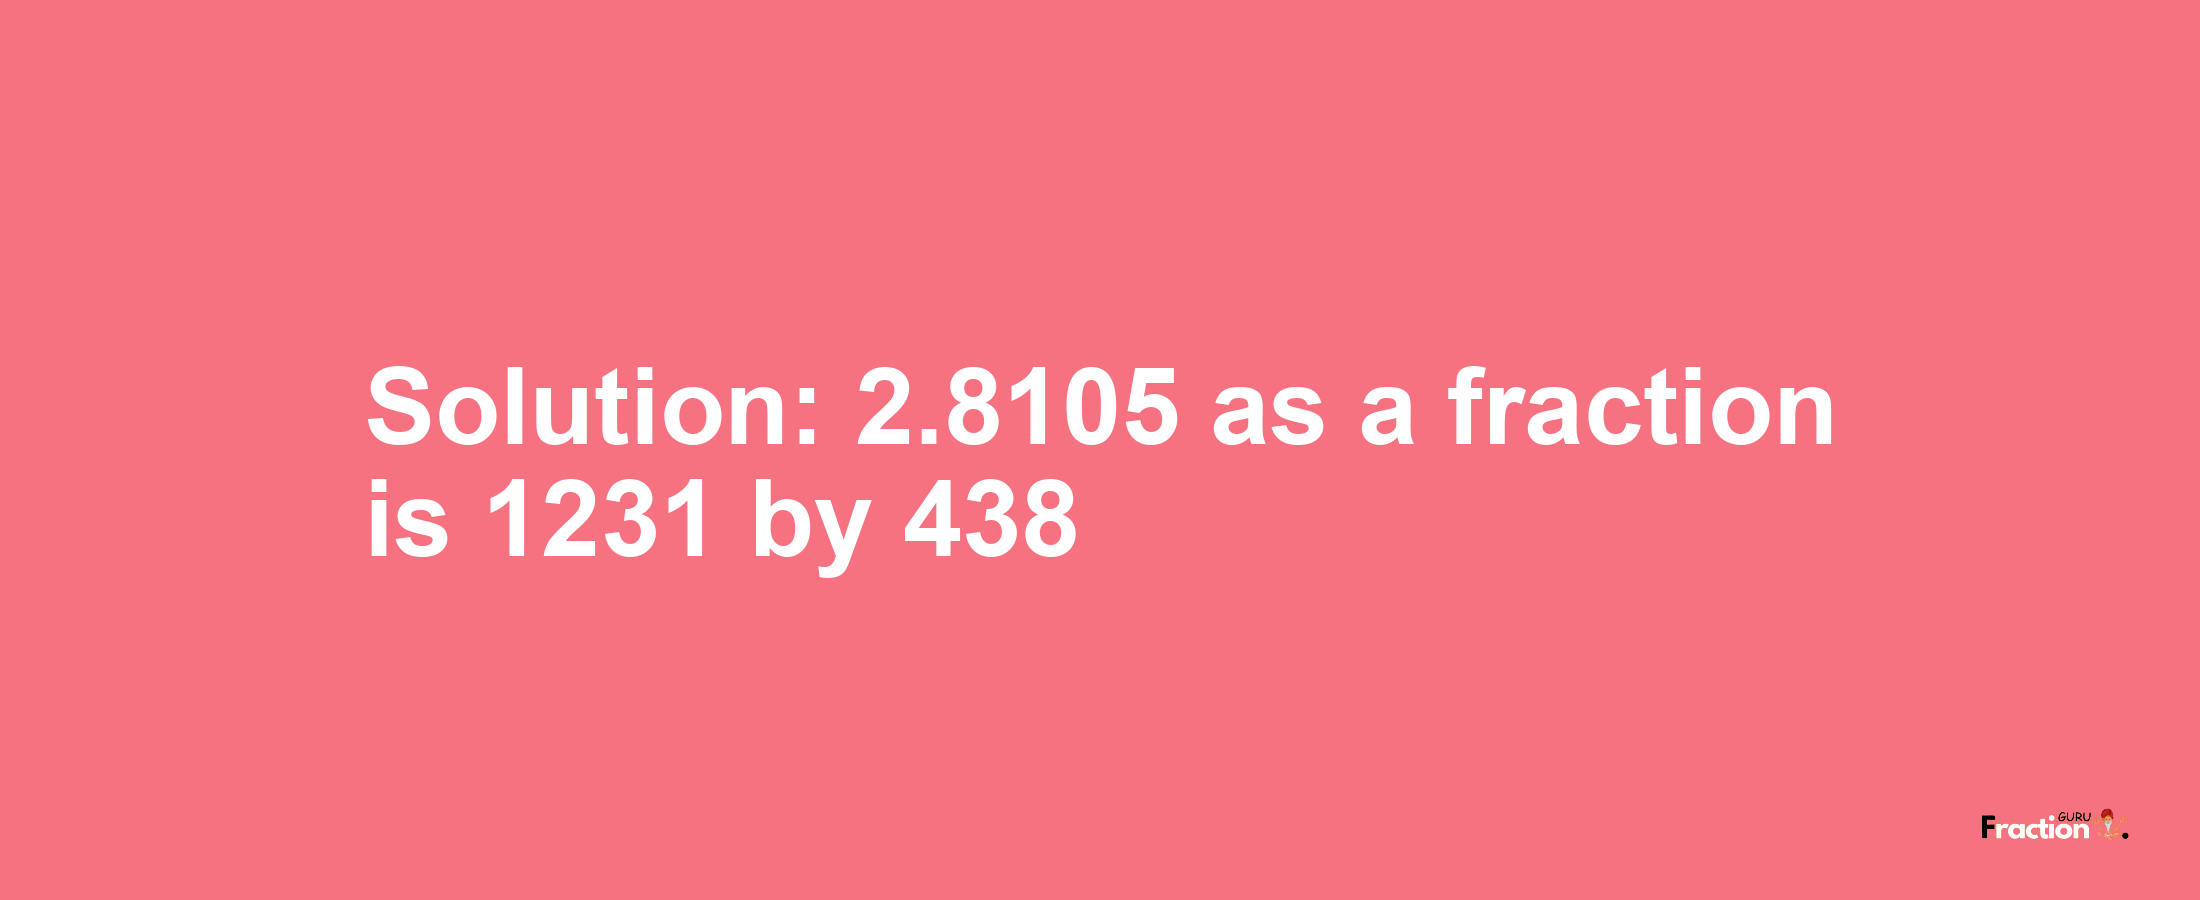 Solution:2.8105 as a fraction is 1231/438